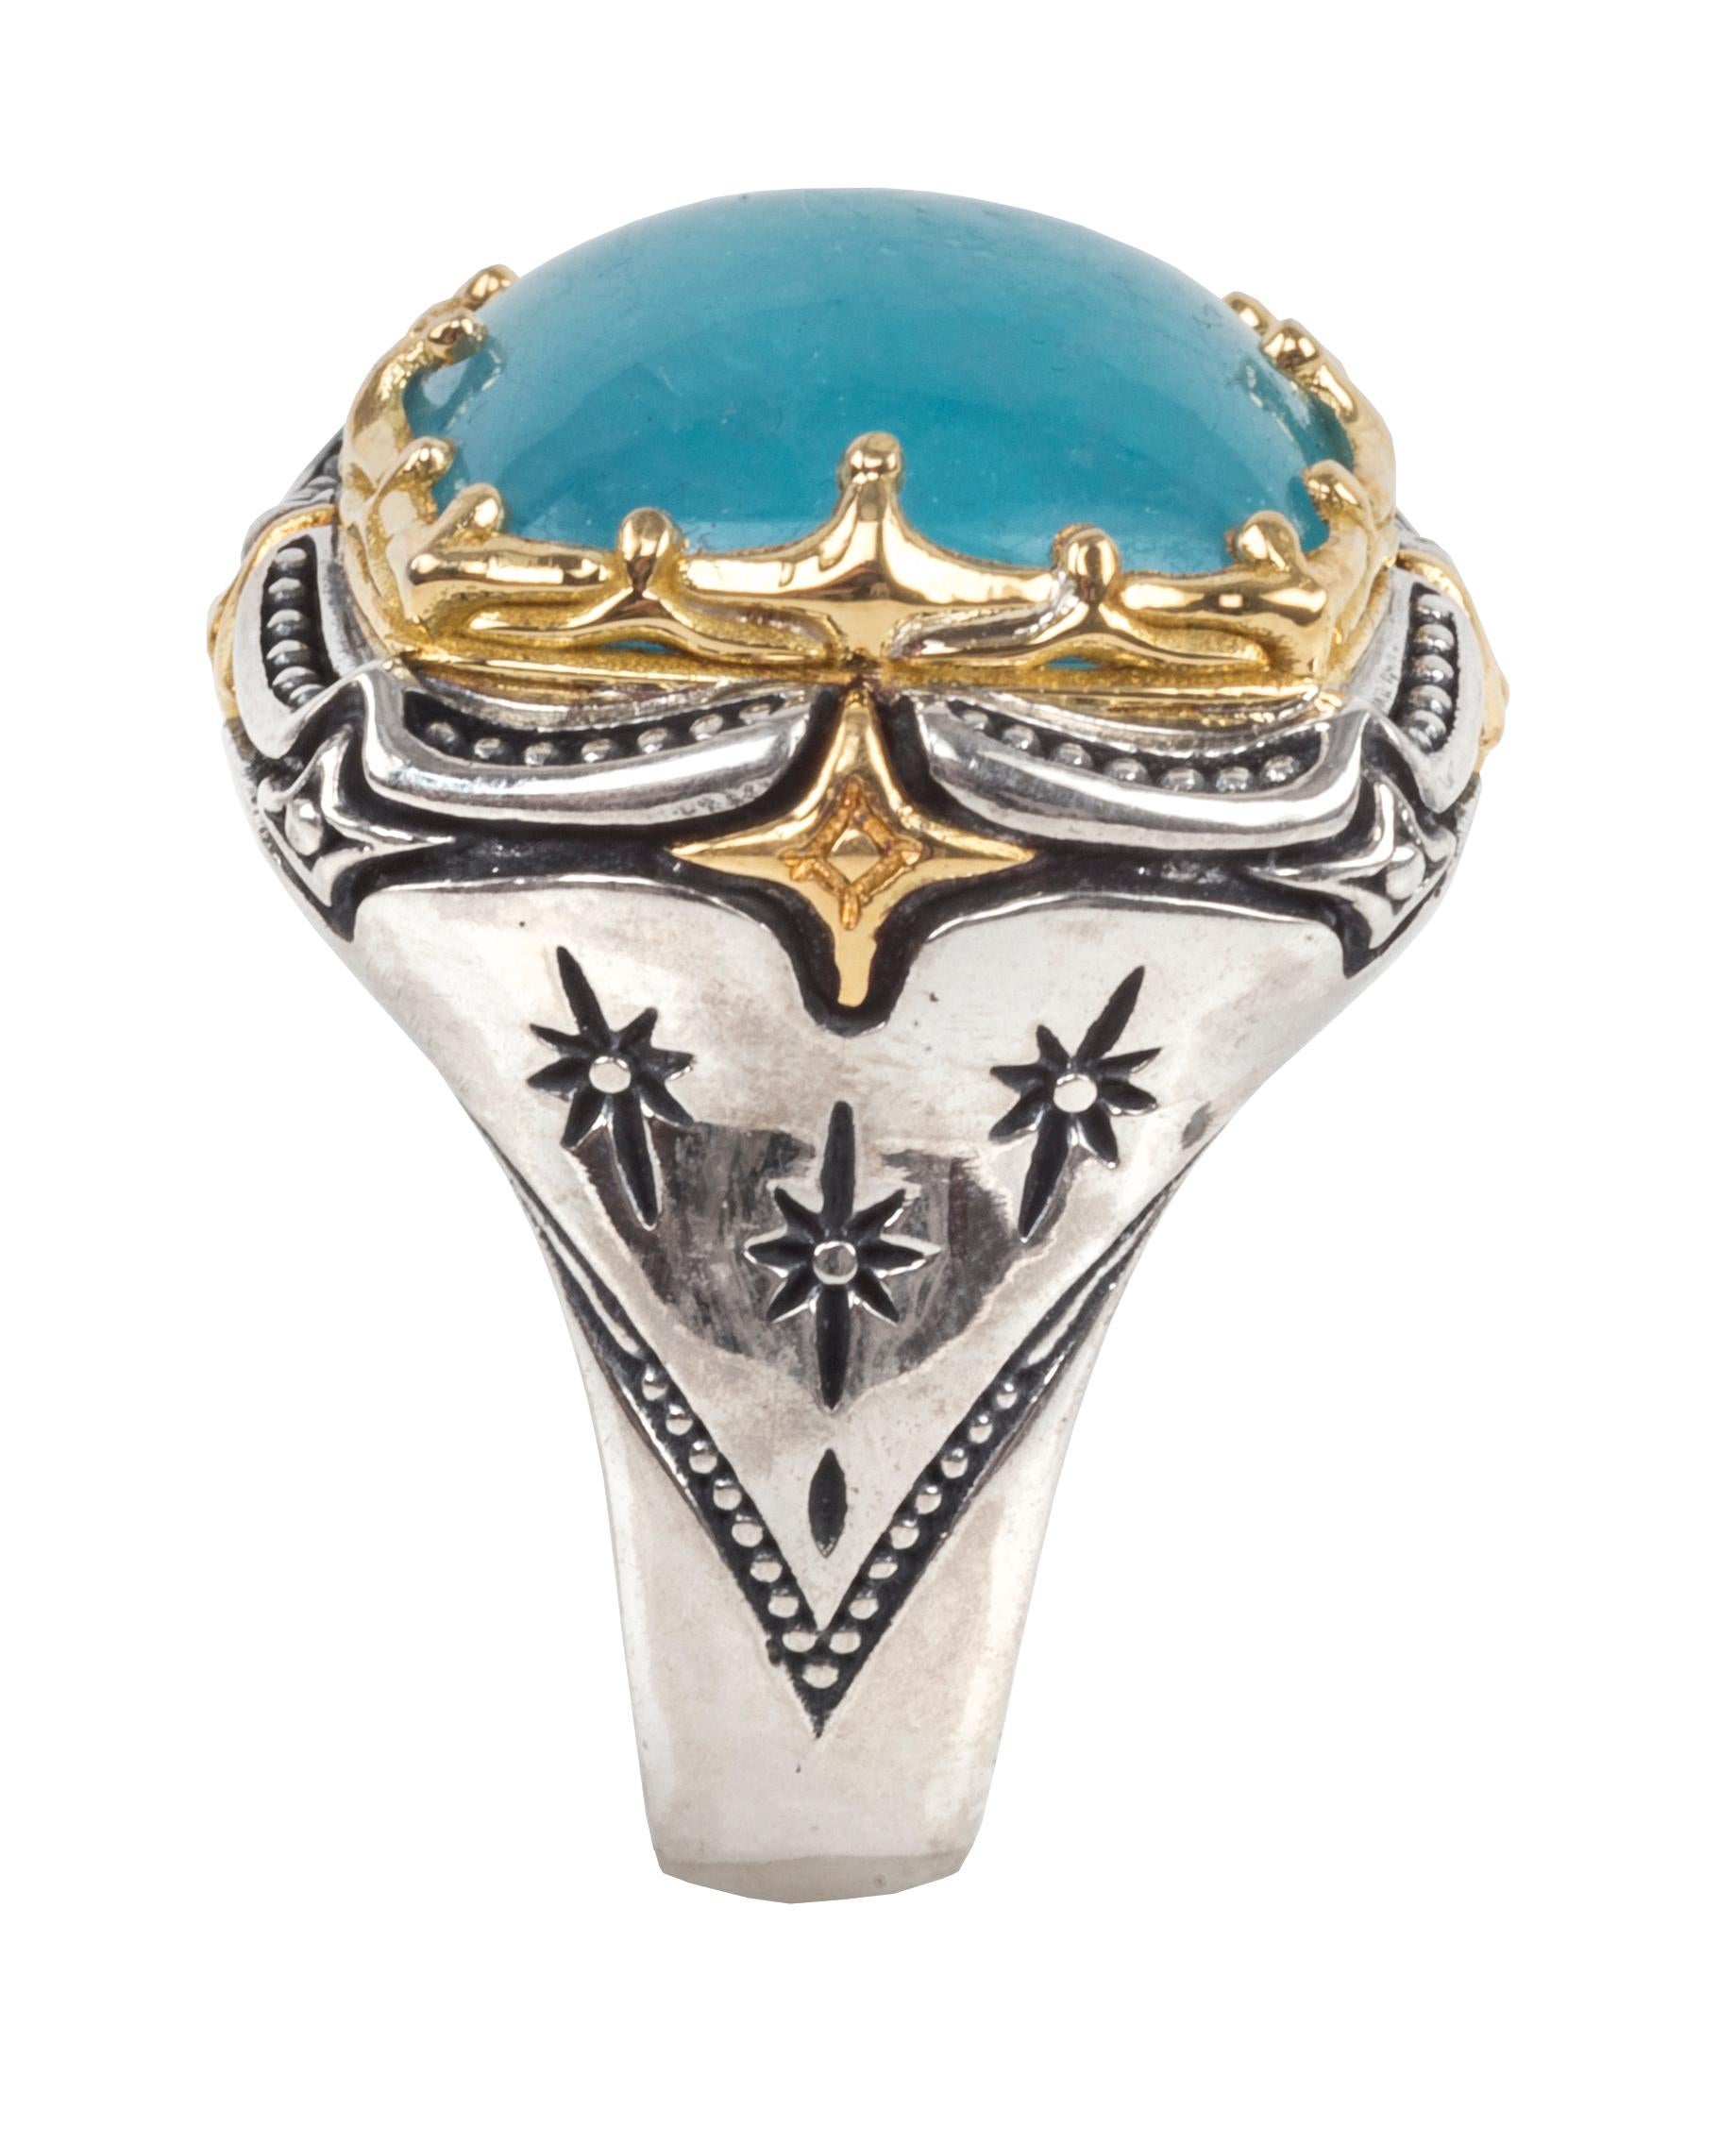 Sterling Silver and 18K Gold Astria Ring with Aquamarine Square Cabochon and Stamped Konstantino 925 and 750.  